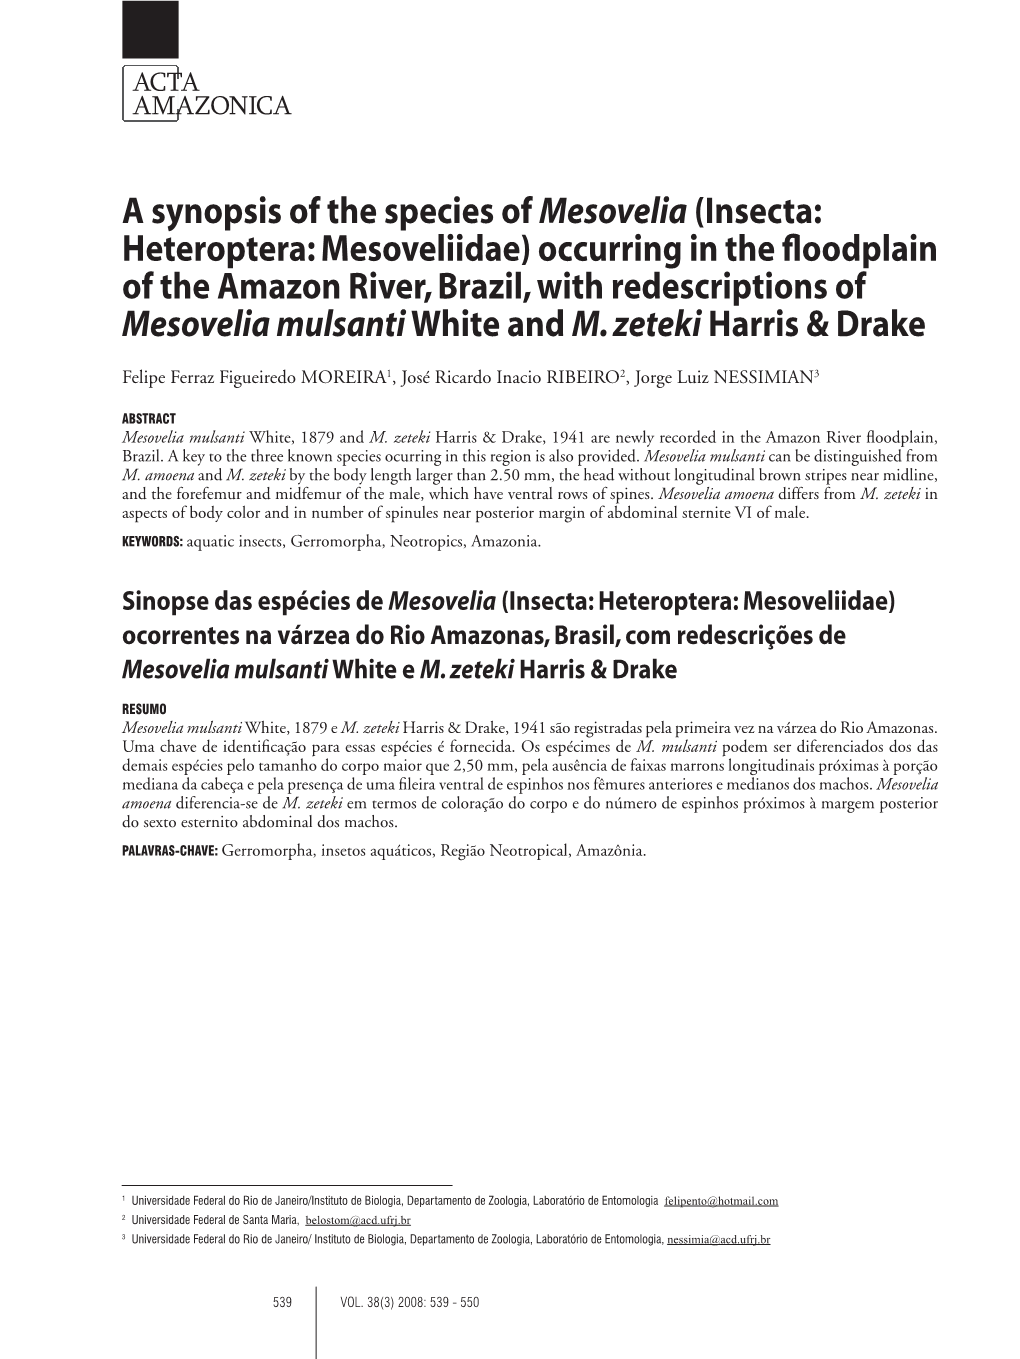 A Synopsis of the Species of Mesovelia(Insecta: Heteroptera